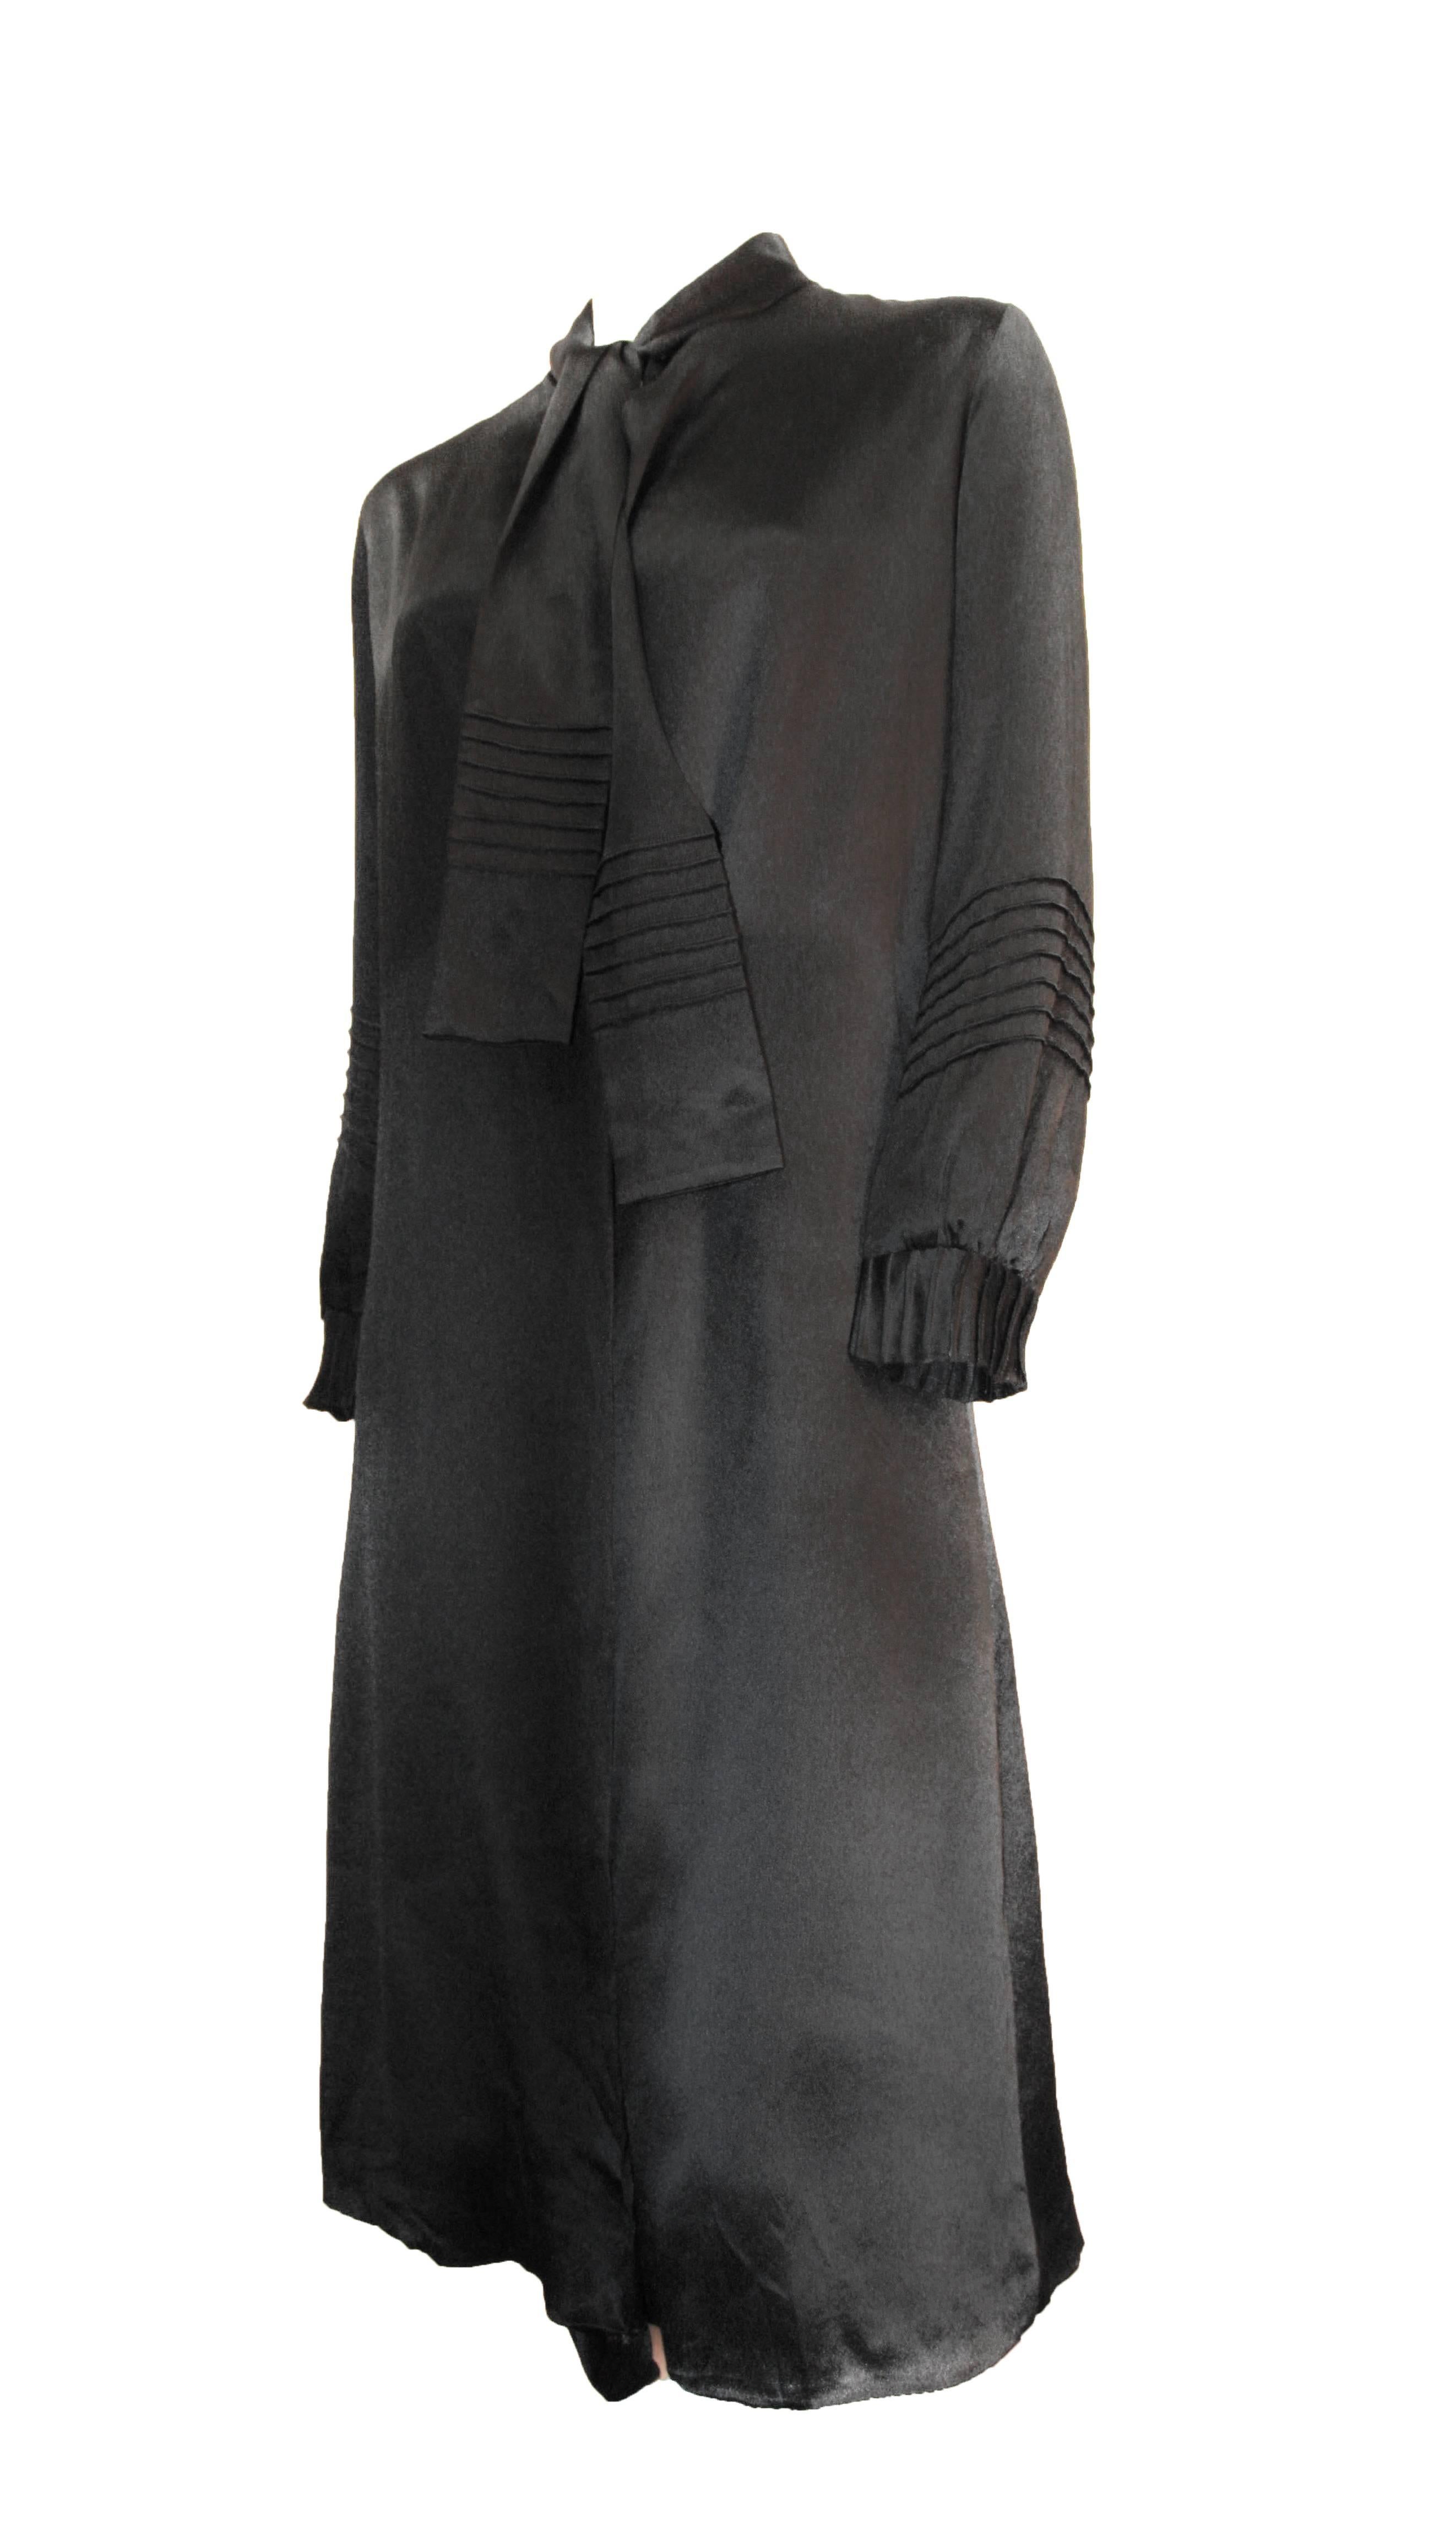 20s black silk coat dress with neck tie and silk covered center button. Fully lined in cream colorer silk. 